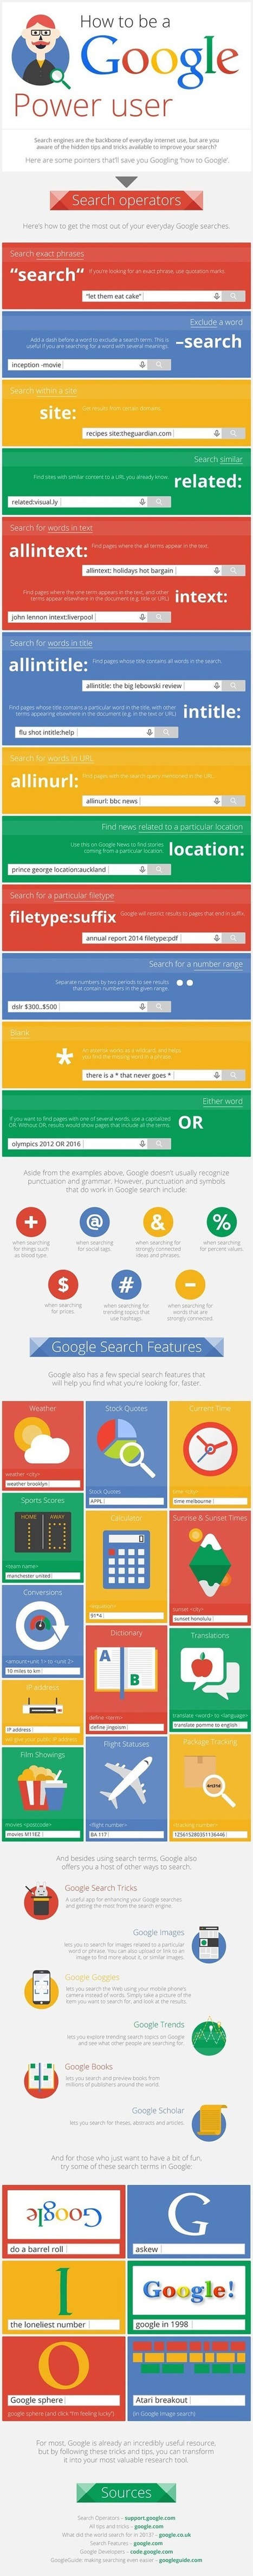 46 Hidden Tips and Tricks to Use Google Search Like a Boss: Infographic | Into the Driver's Seat | Scoop.it